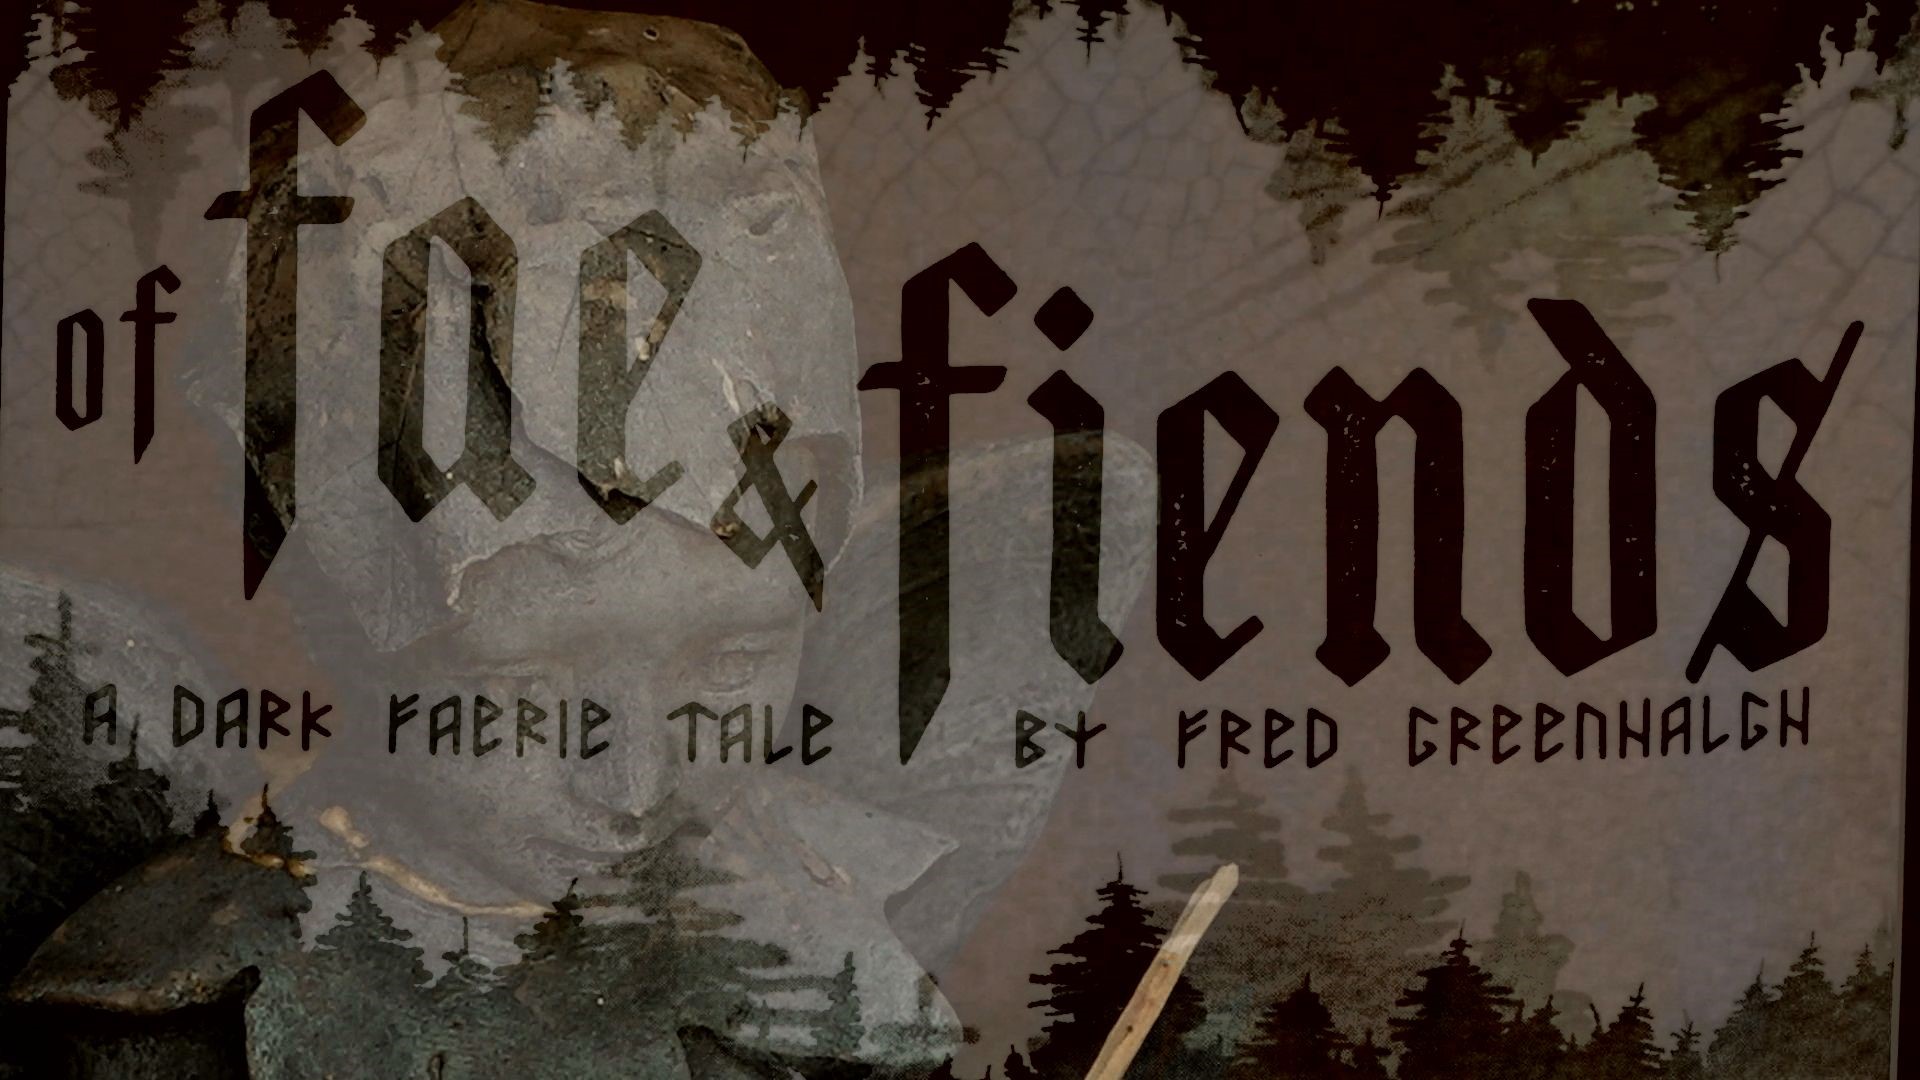 Fred Greenhalgh releases his first radio drama - 'Of Fae and Fiends' -  for kids and its companion novel. Written, set, and recorded all in Maine.